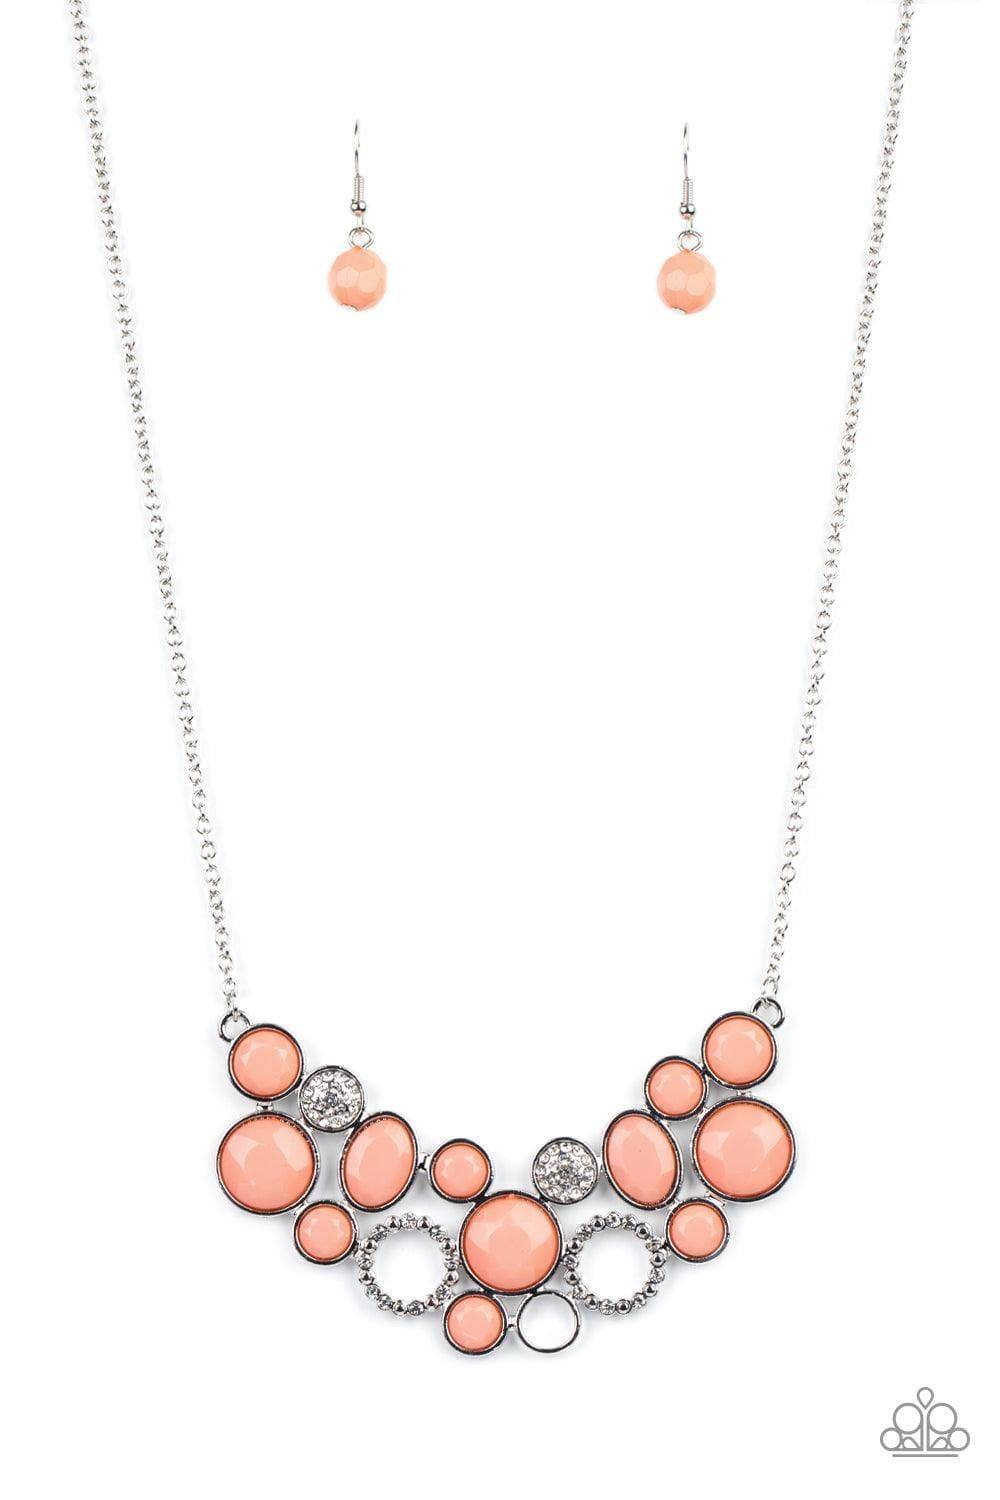 Paparazzi Accessories - Extra Eloquent - Orange (coral) Necklace - Bling by JessieK